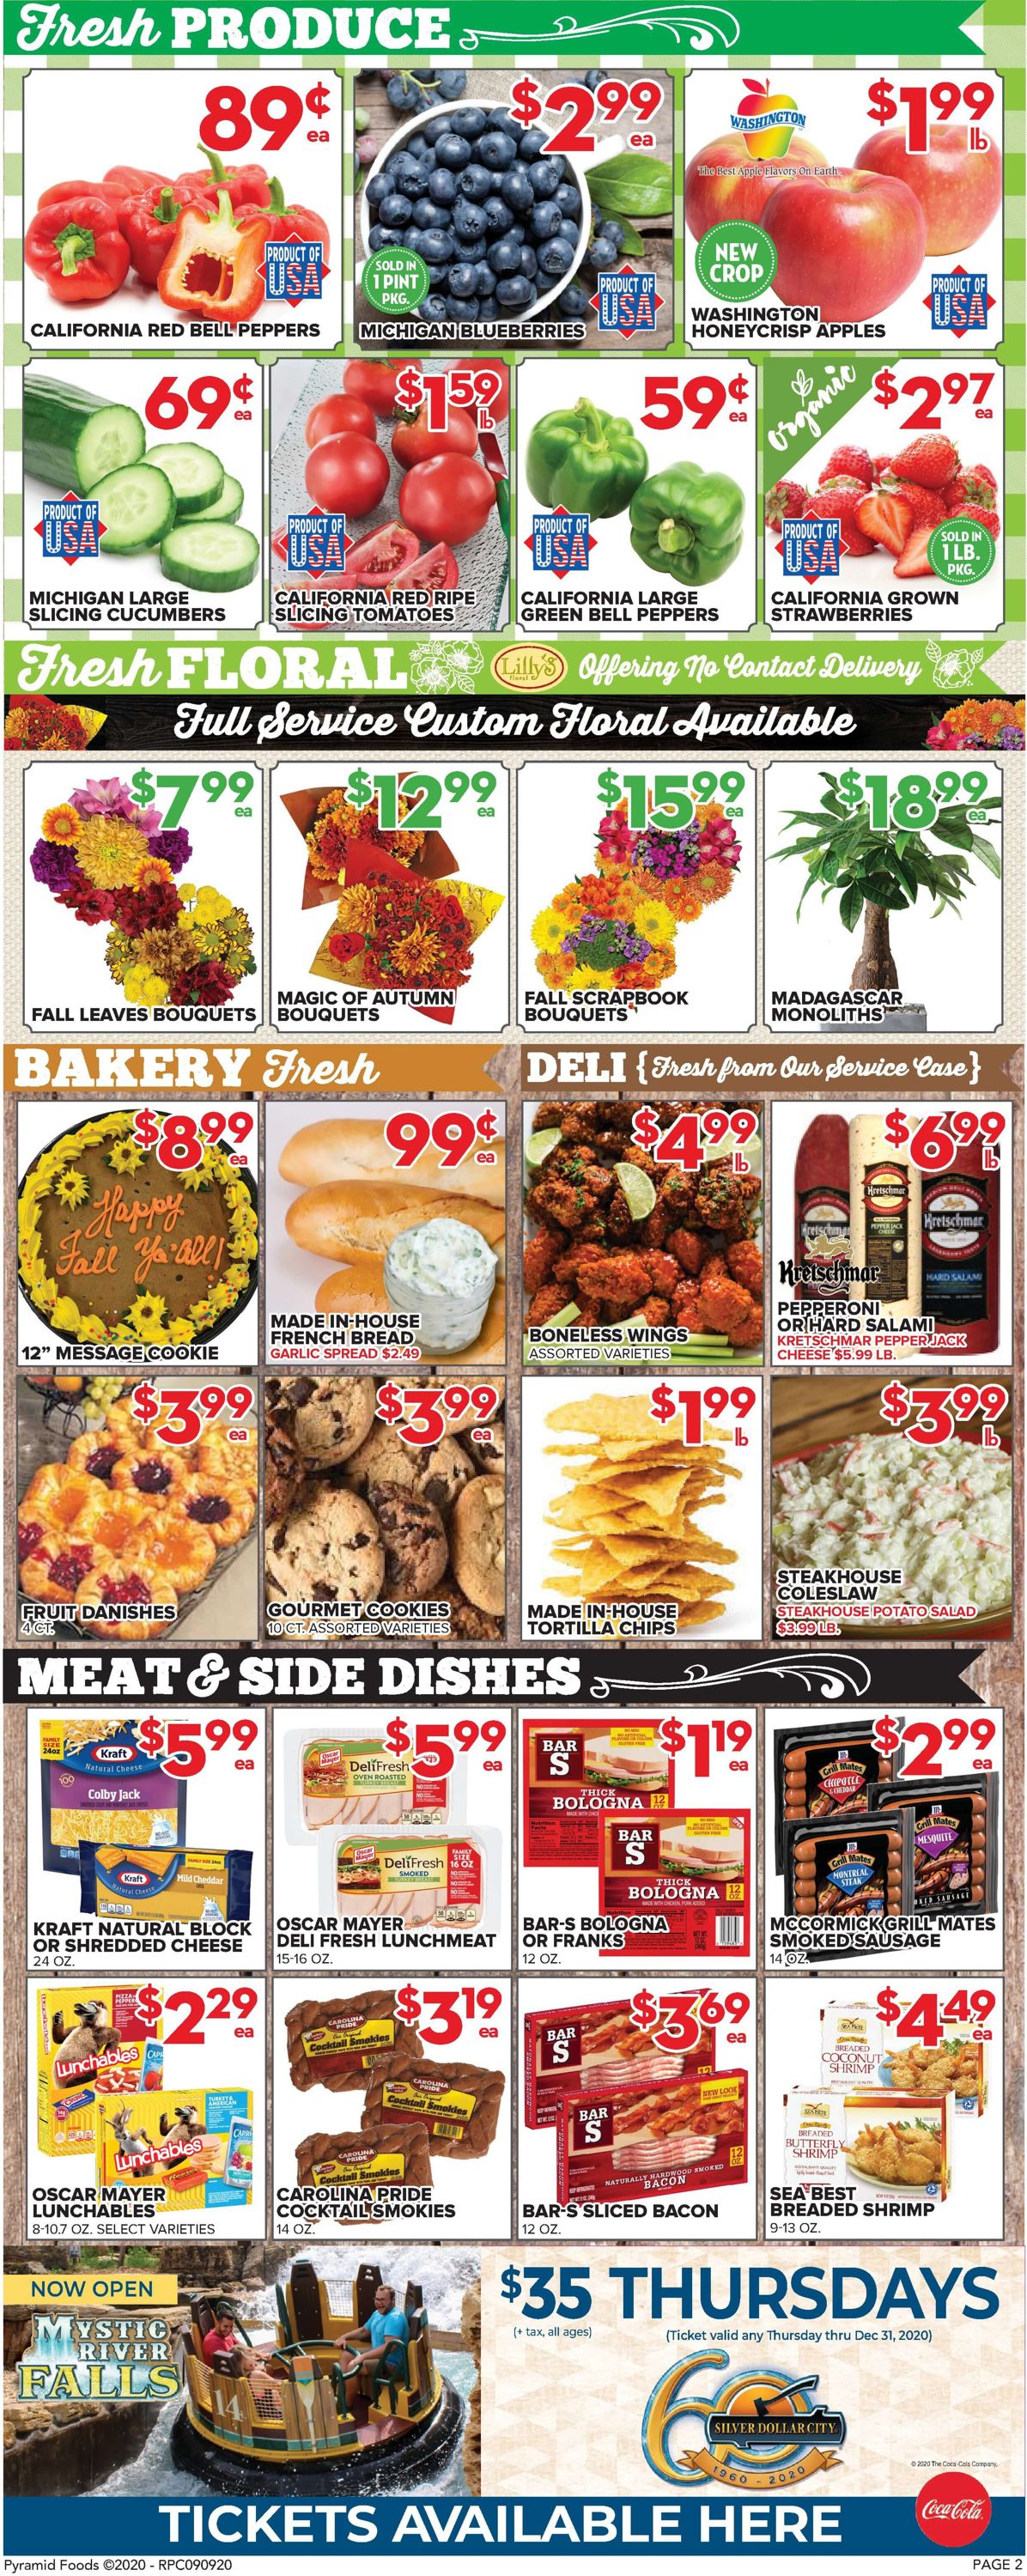 Price Cutter Weekly Ad Circular - valid 09/09-09/15/2020 (Page 2)